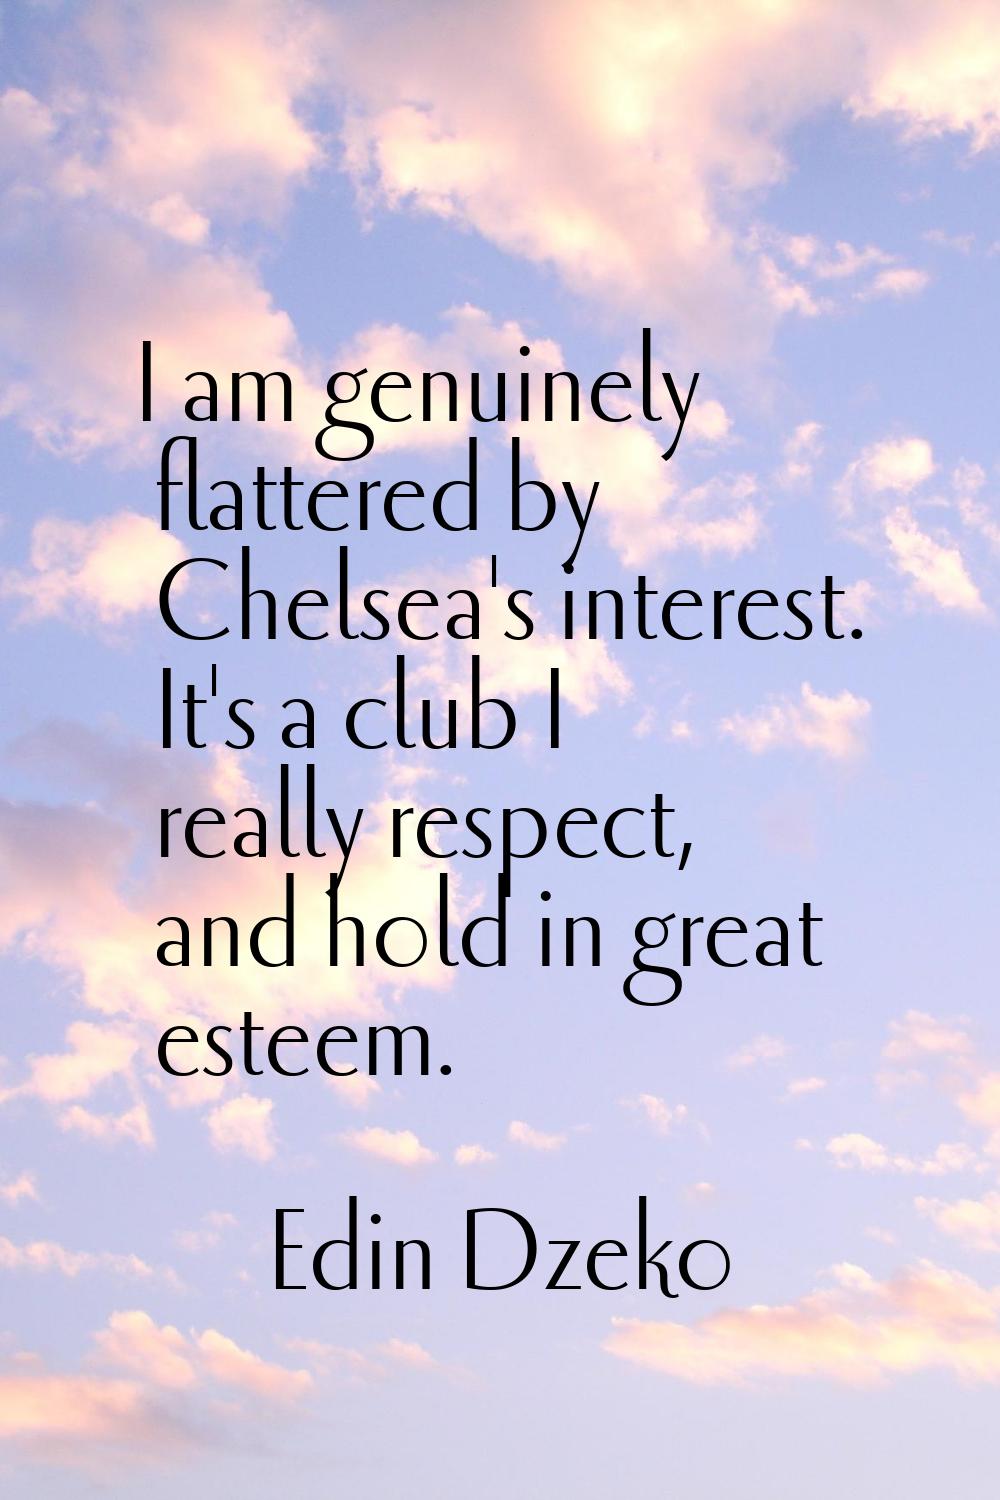 I am genuinely flattered by Chelsea's interest. It's a club I really respect, and hold in great est